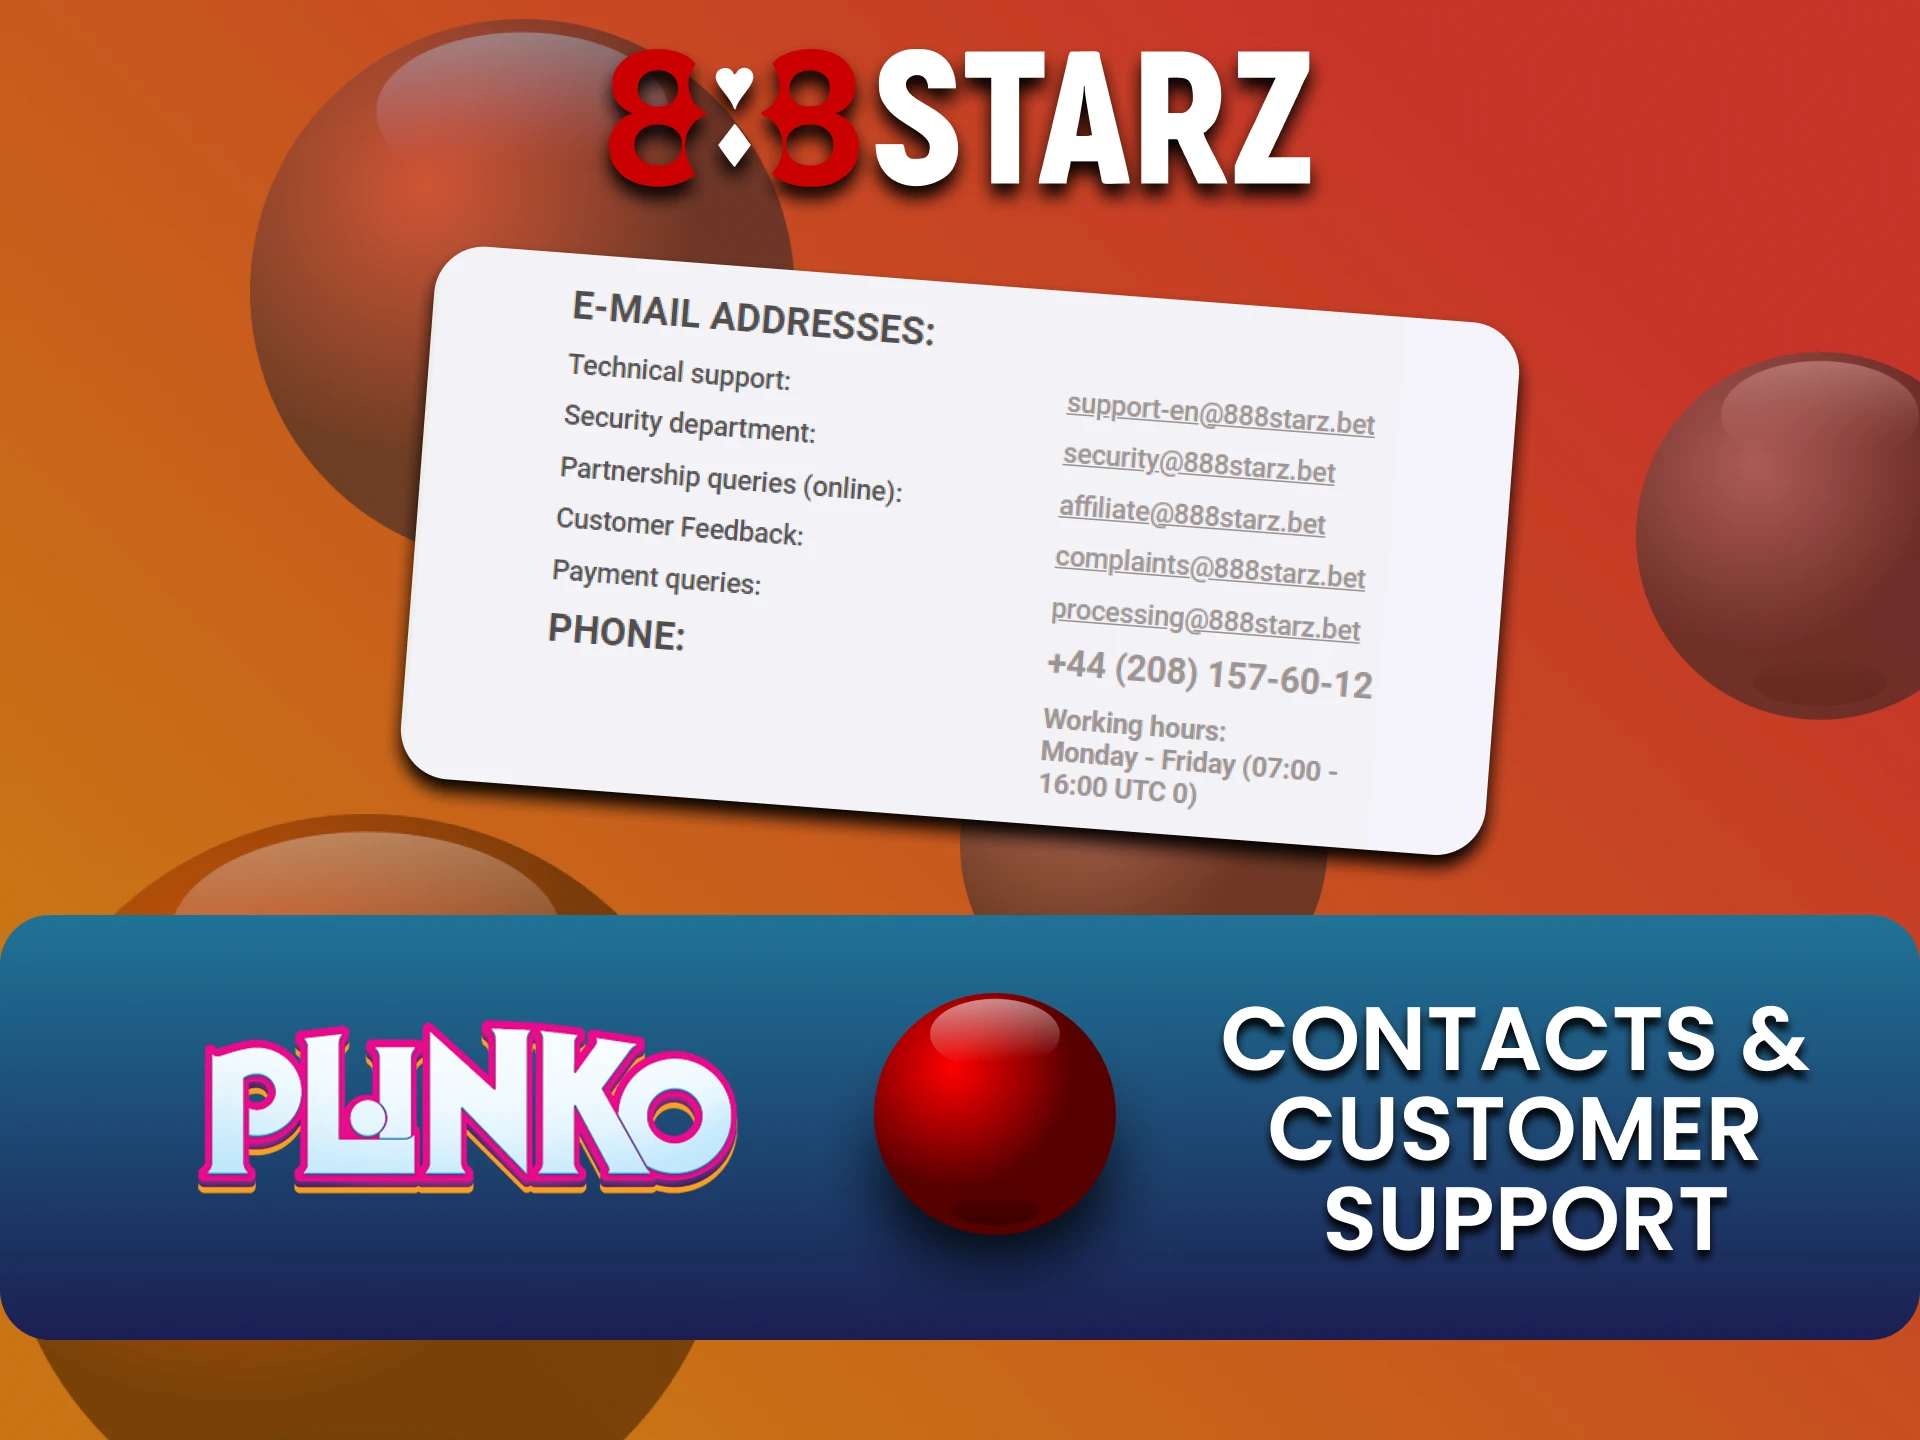 We will tell you how to contact the 888starz team.